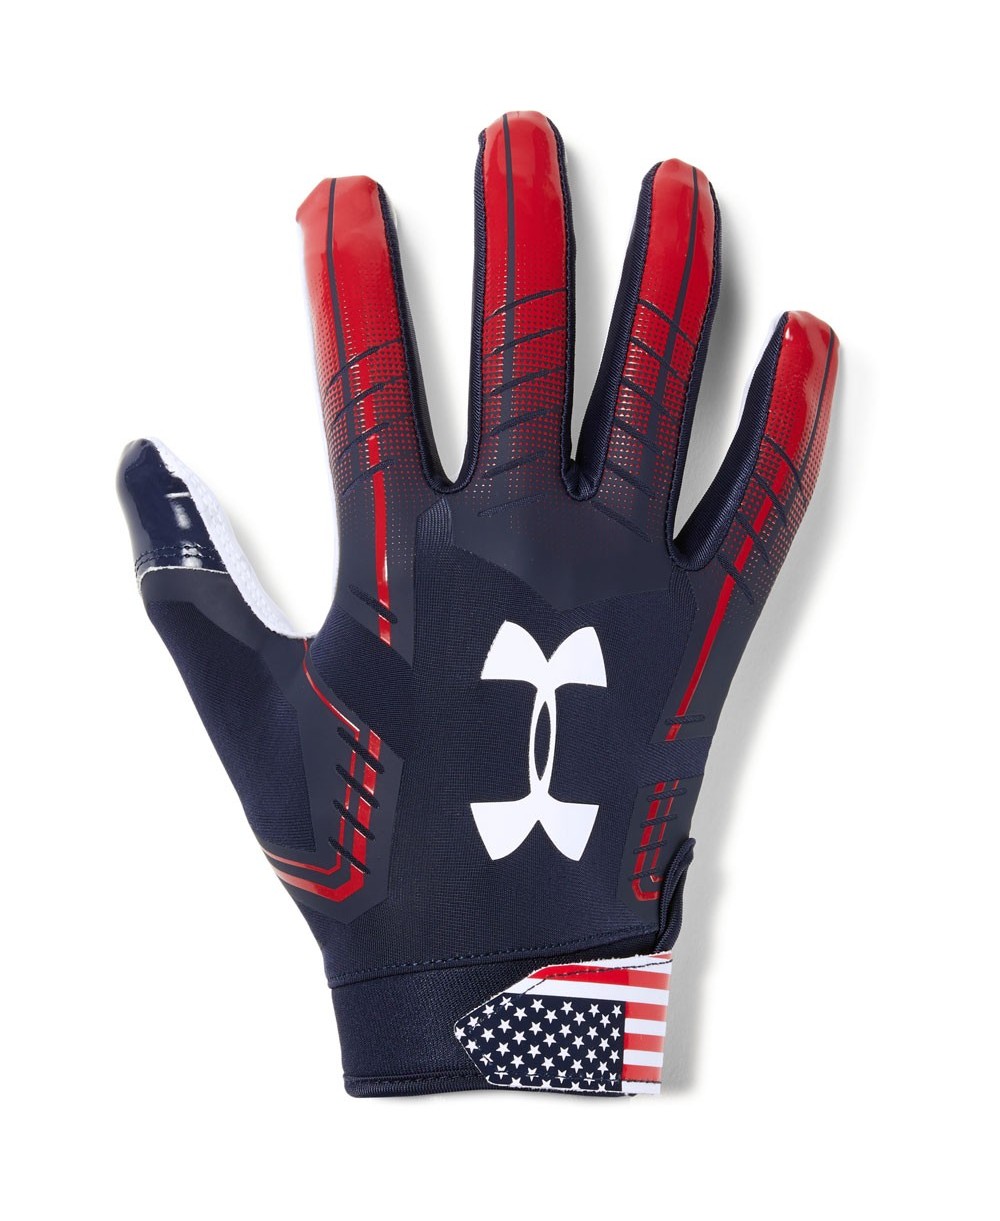 NEW Under Armour Gray/Navy Football Gloves Multiple Sizes 